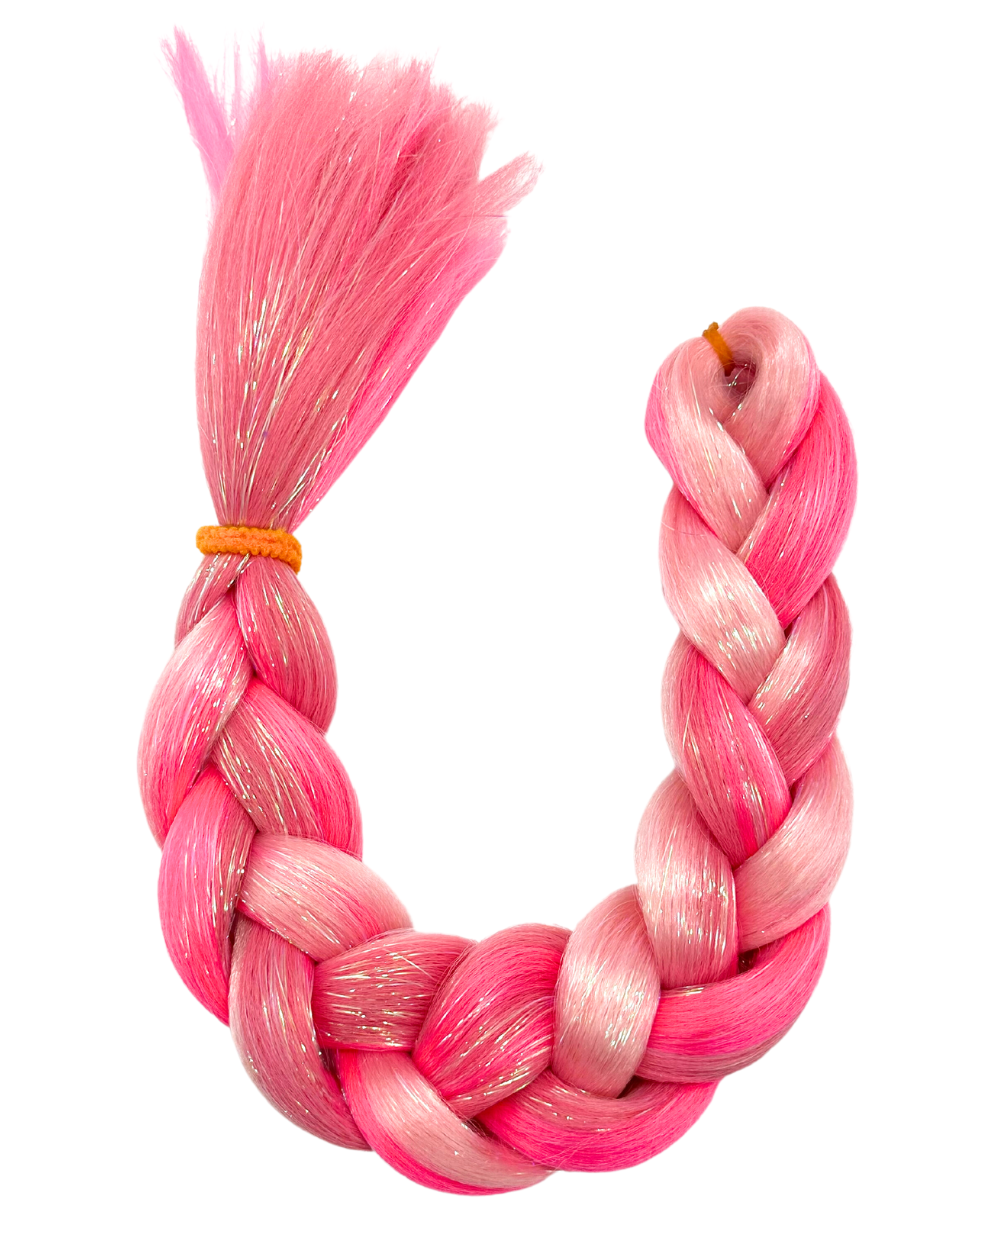 Dollface - Neon Pink UV-Reactive Hair Extension with Tinsel - Lunautics Braid-In Hair